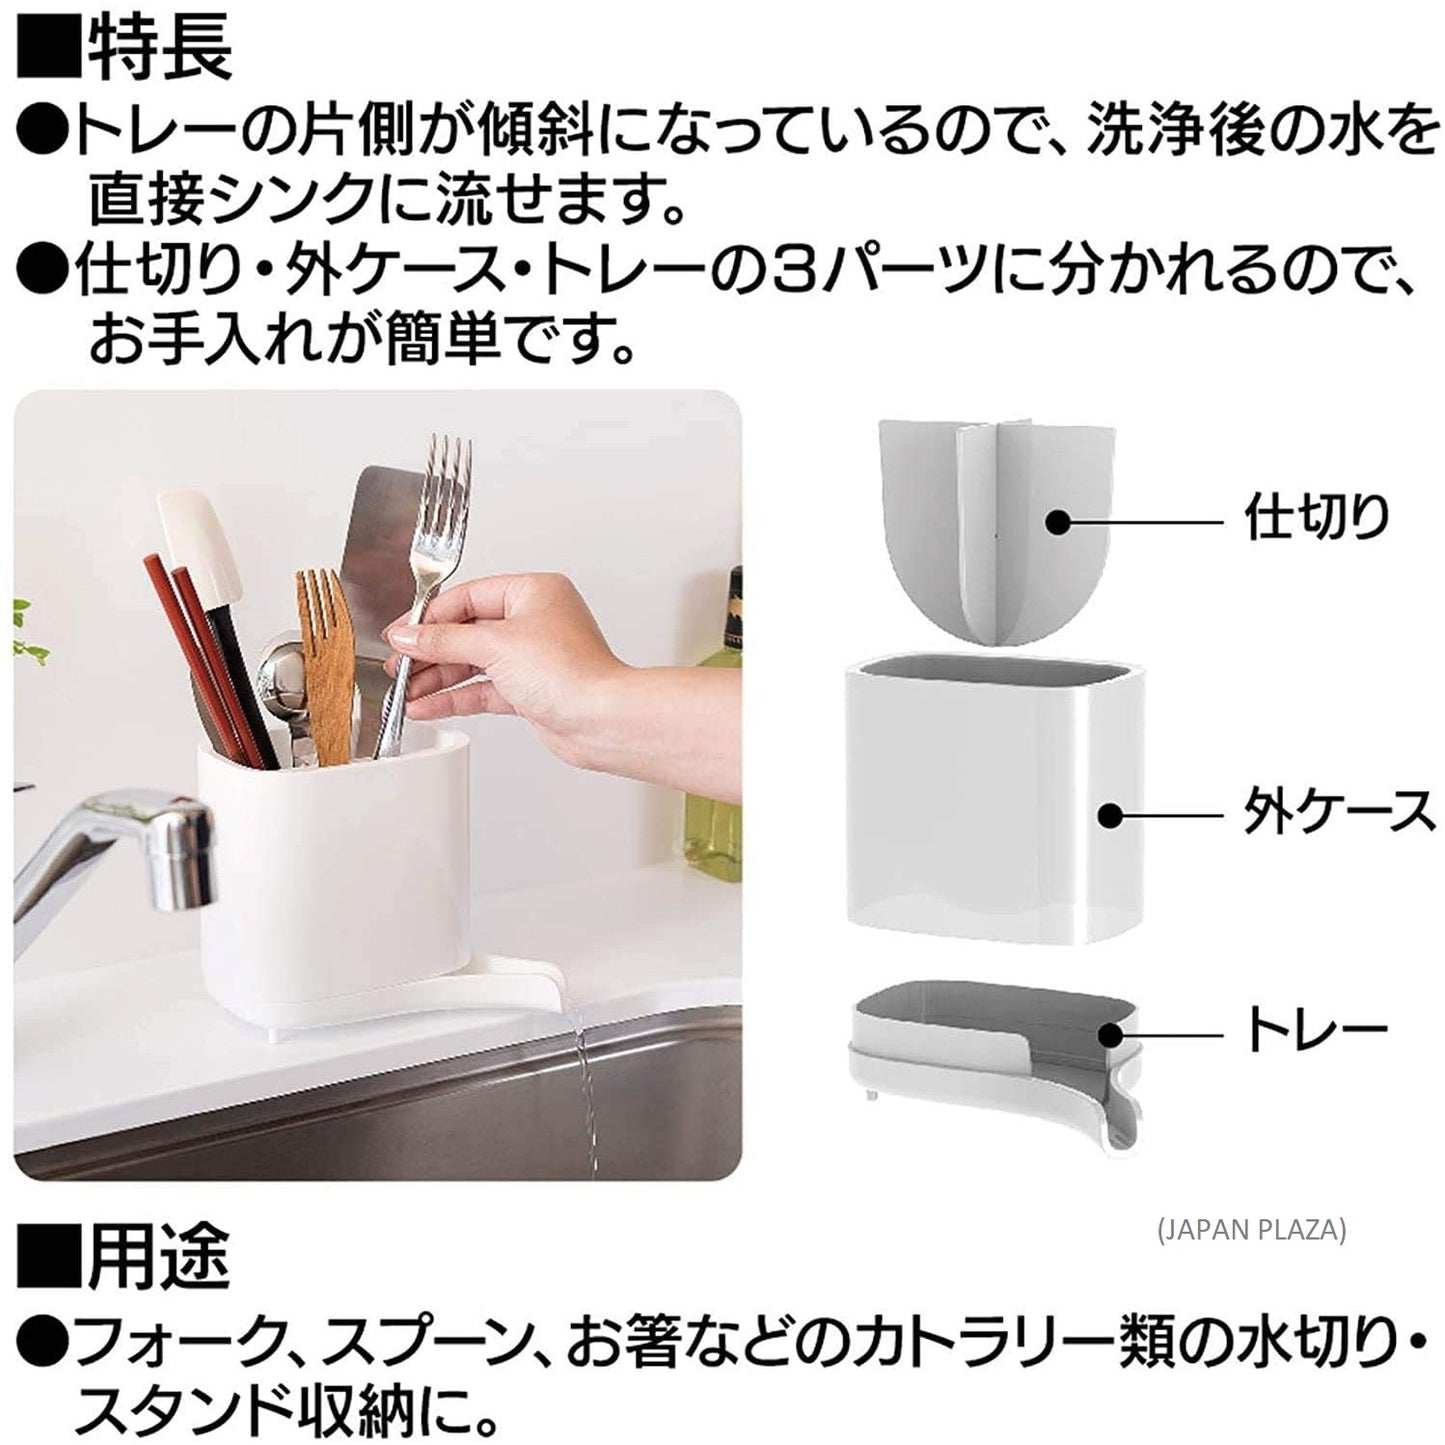 Kitchen/Bath Smart Cutlery Stand (Made in Japan)